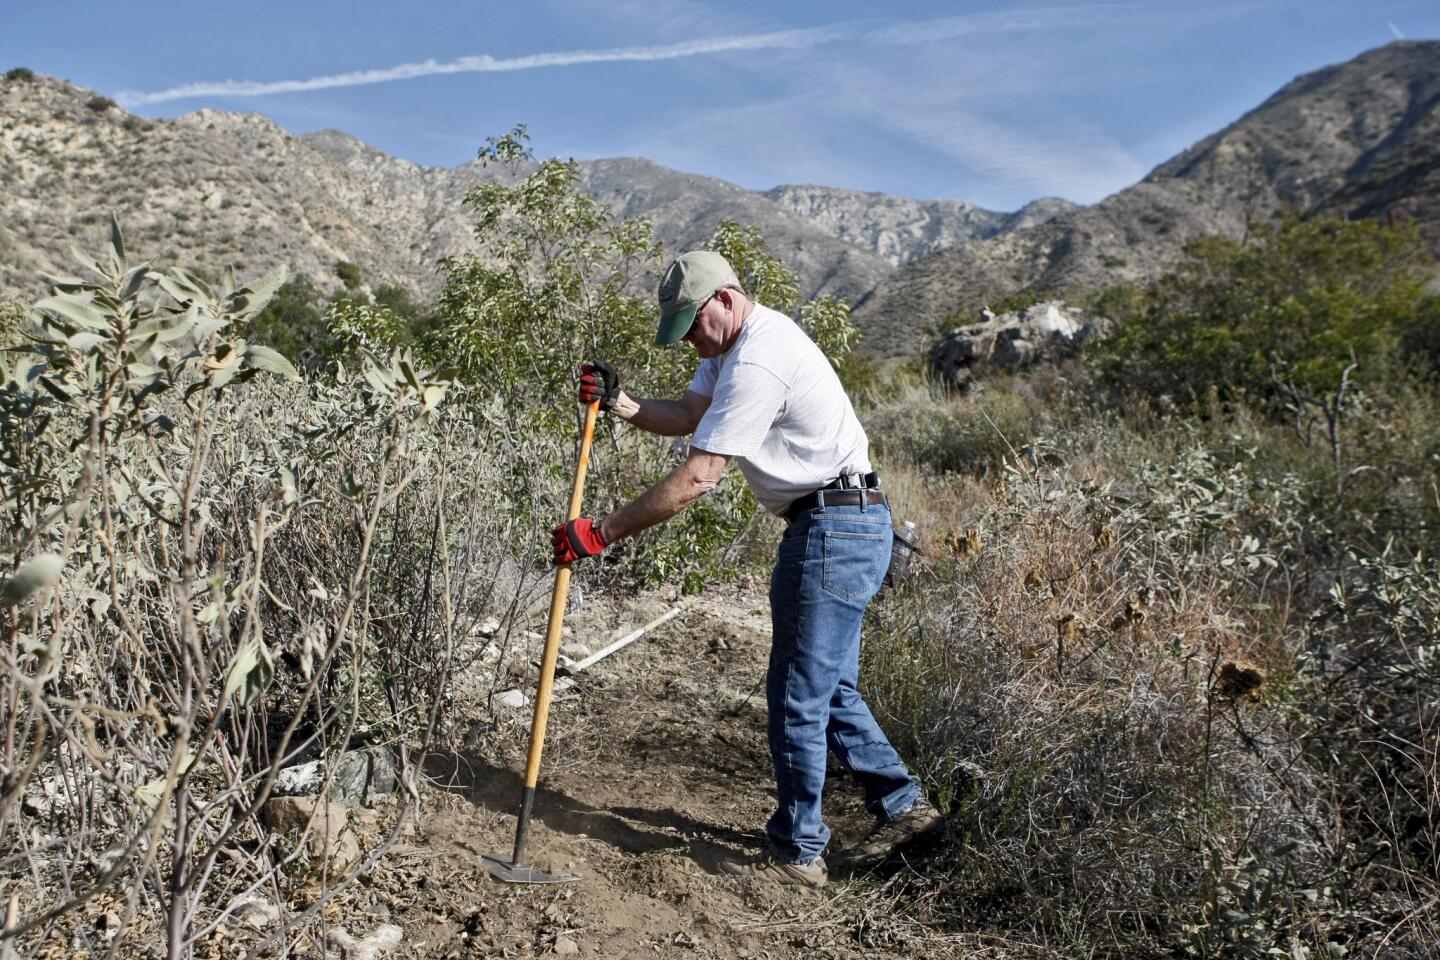 Frank Carlsen of La Crescenta helps smooth out a new trail being built by hand at Deukmejian Wilderness Park in Glendale on Saturday, January 4, 2014.